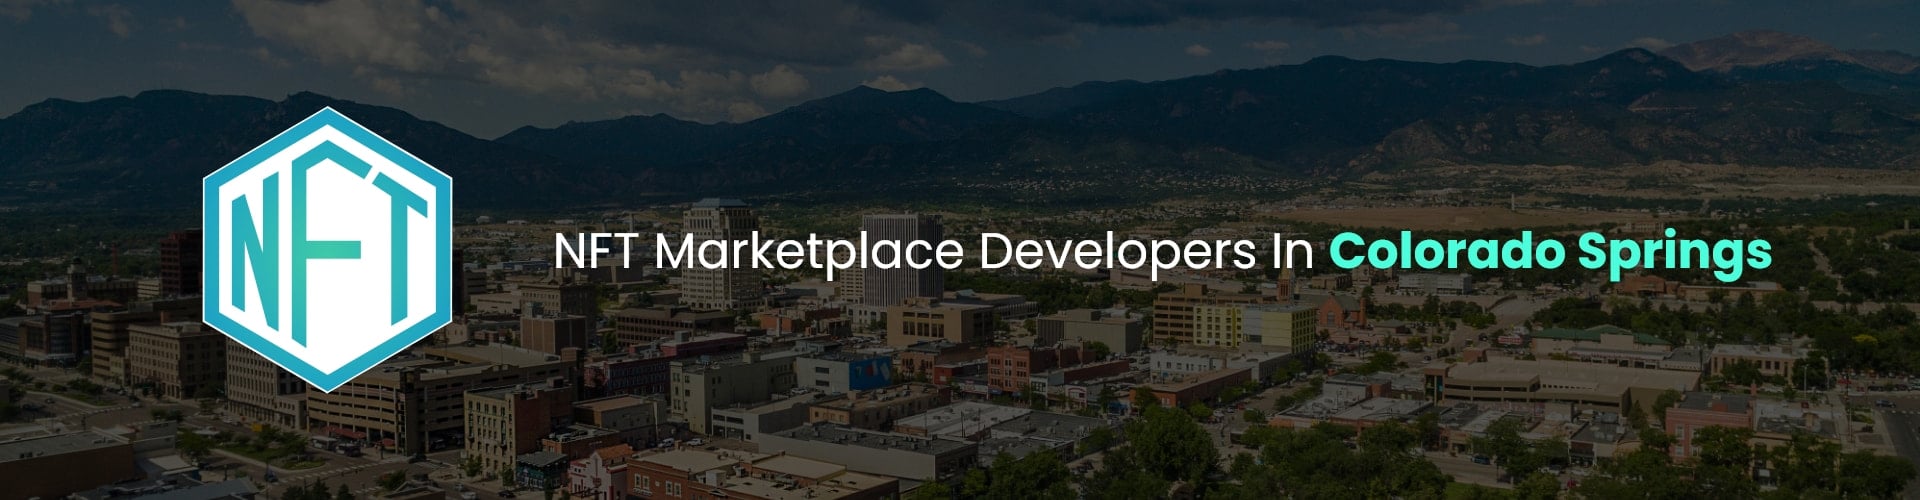 hire nft marketplace developers in colorado springs